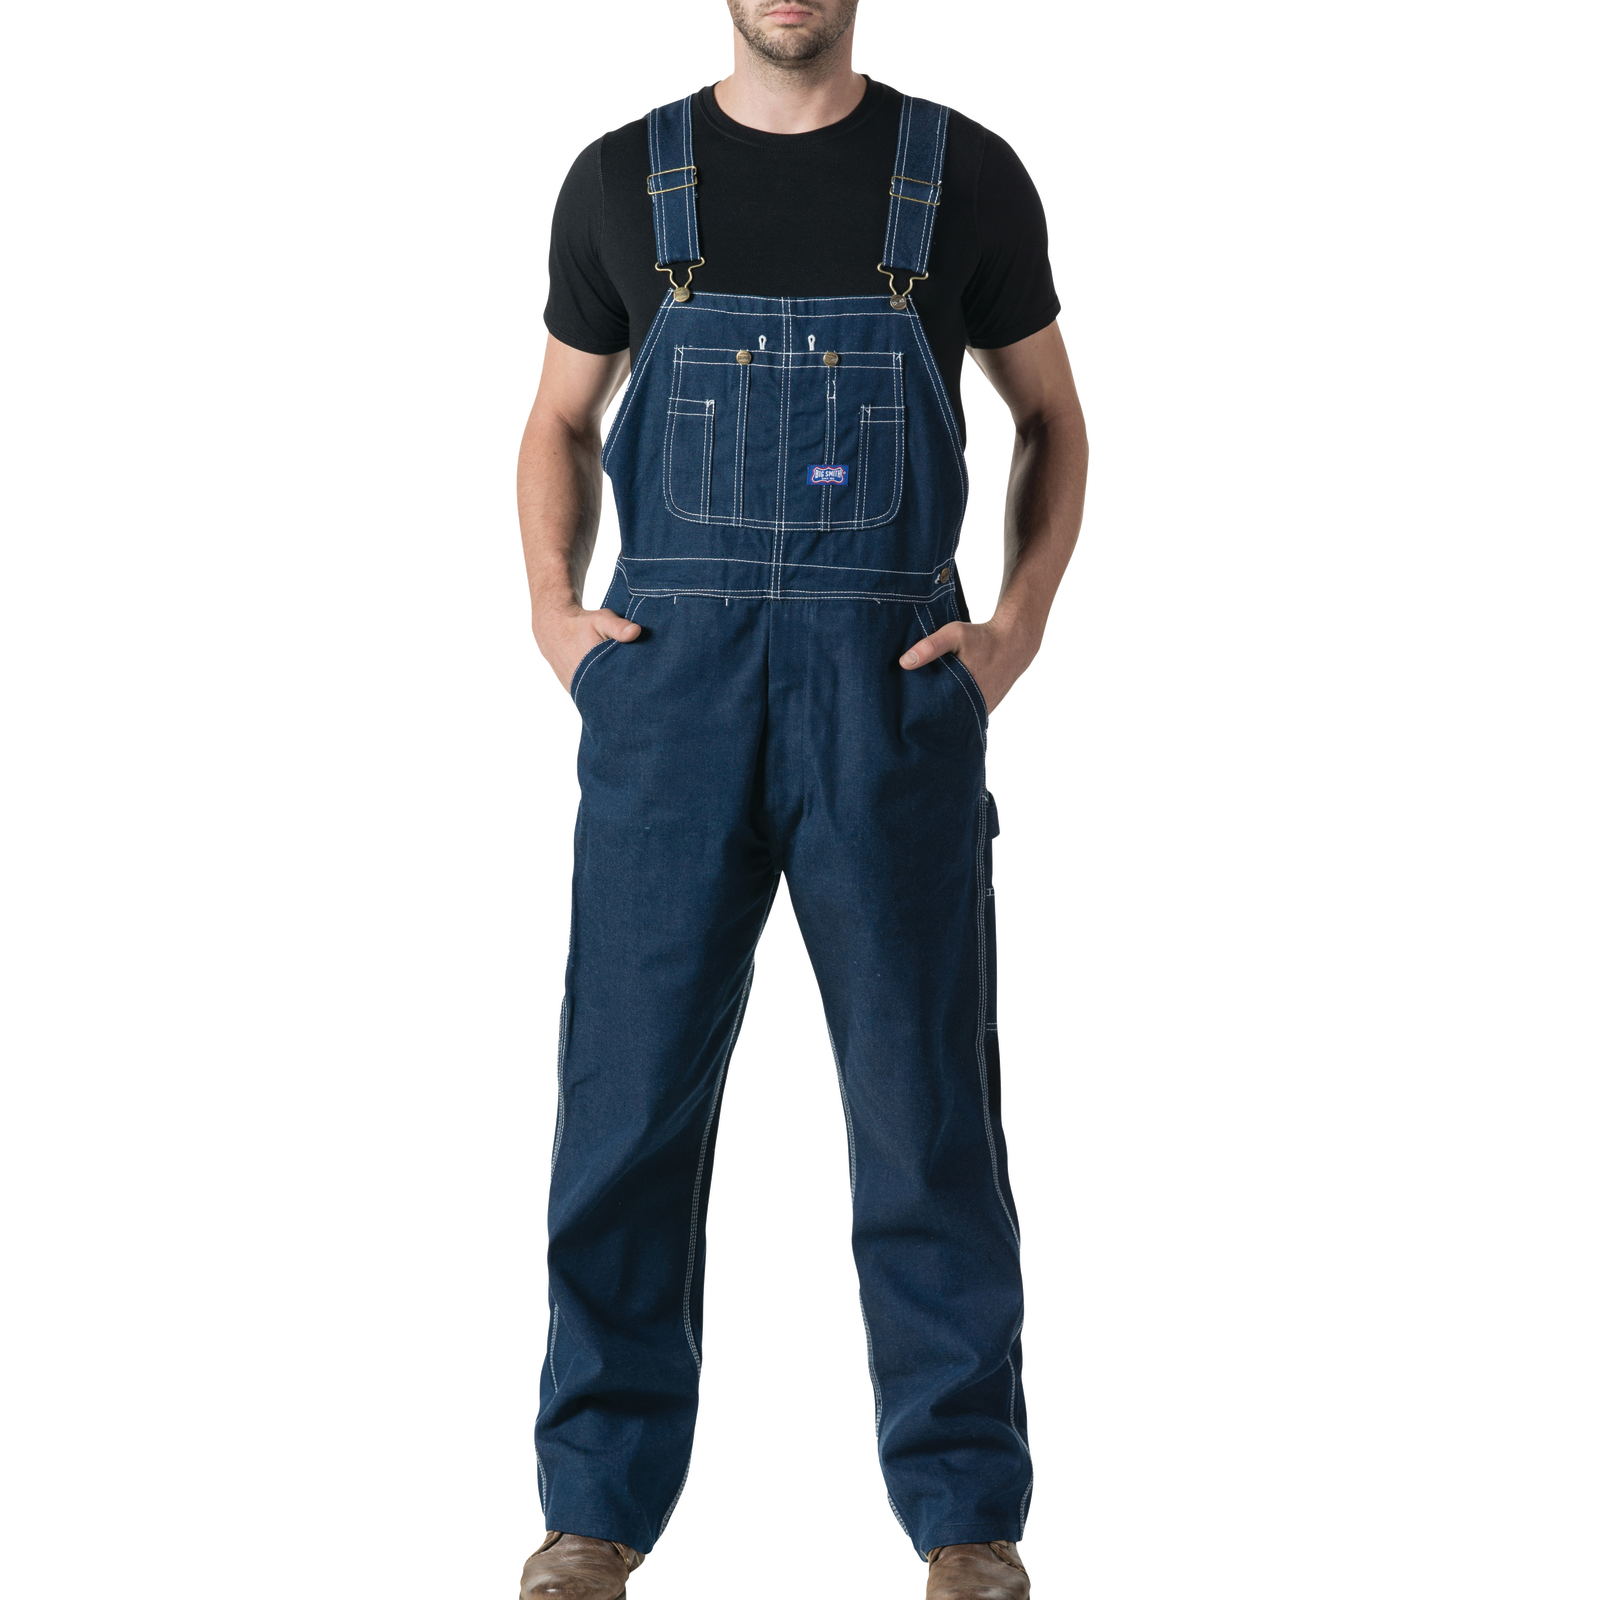 980 Round House Made in USA Zipper Fly Blue Denim Bib Overalls – Round  House American Made Jeans Made in USA Overalls, Workwear